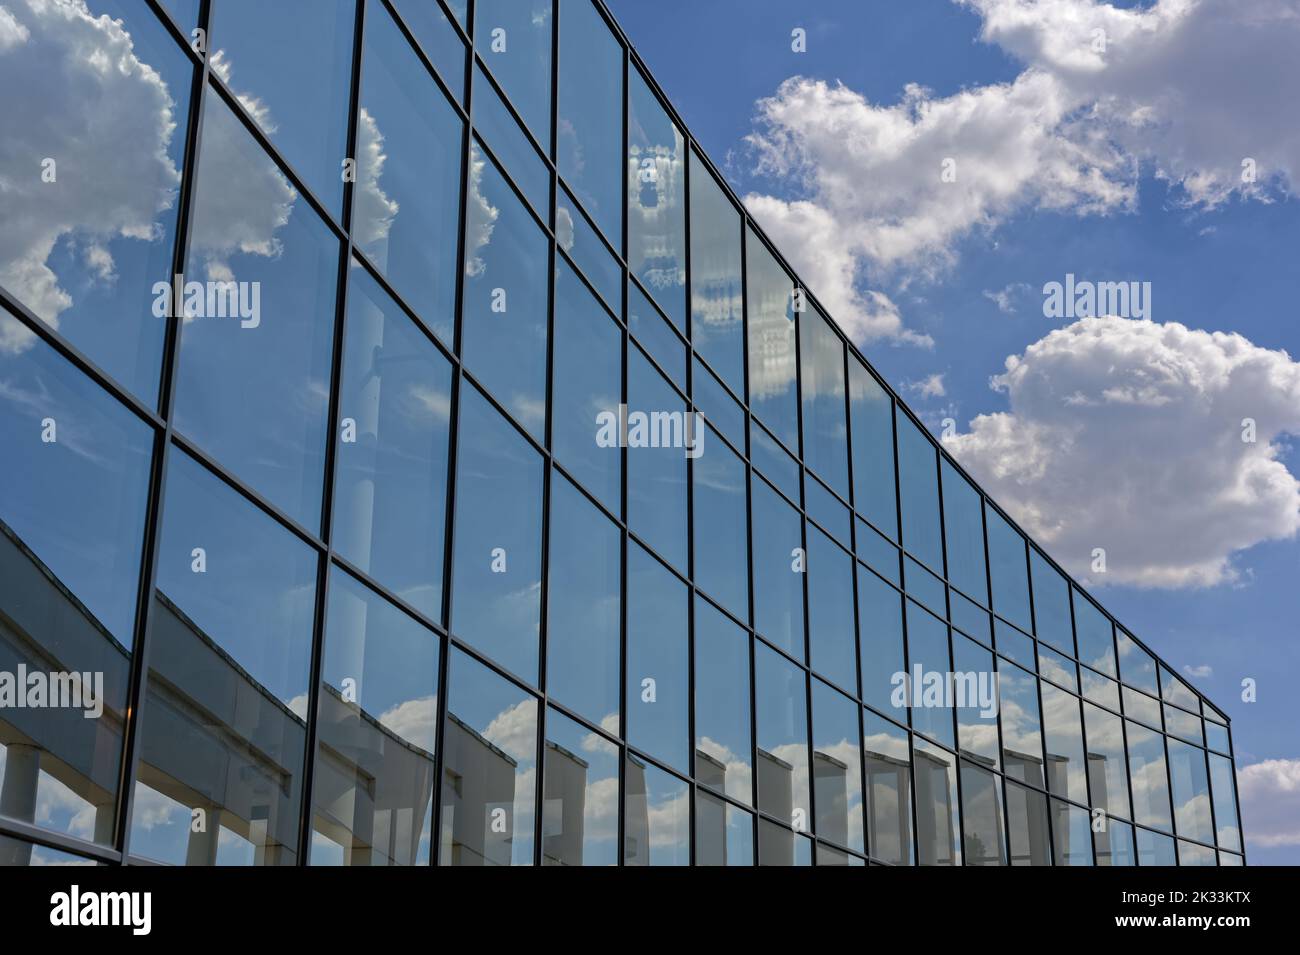 Facade details with large windows and reflections Stock Photo